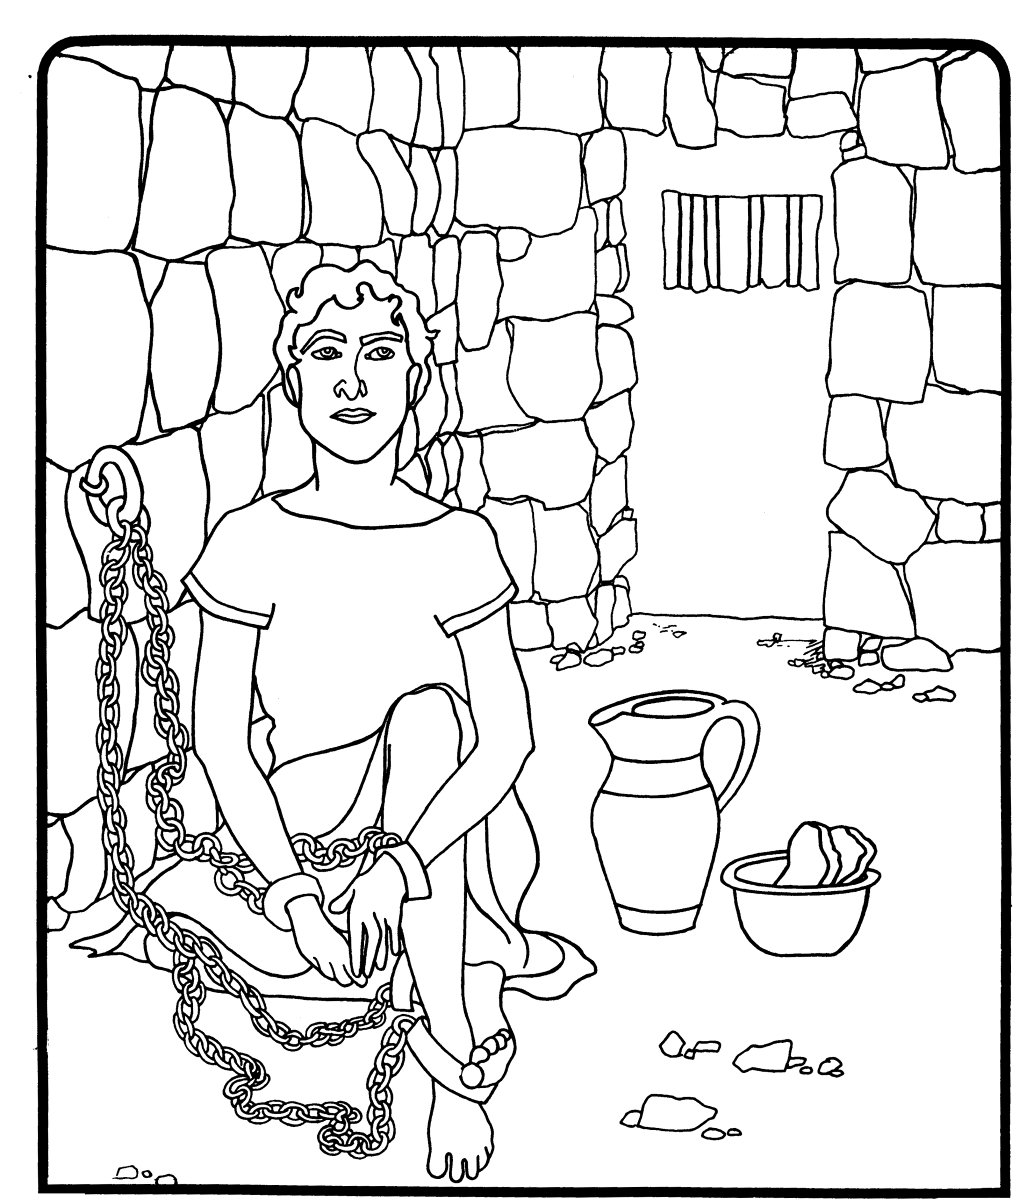 Joseph In Egypt - Coloring Pages for Kids and for Adults